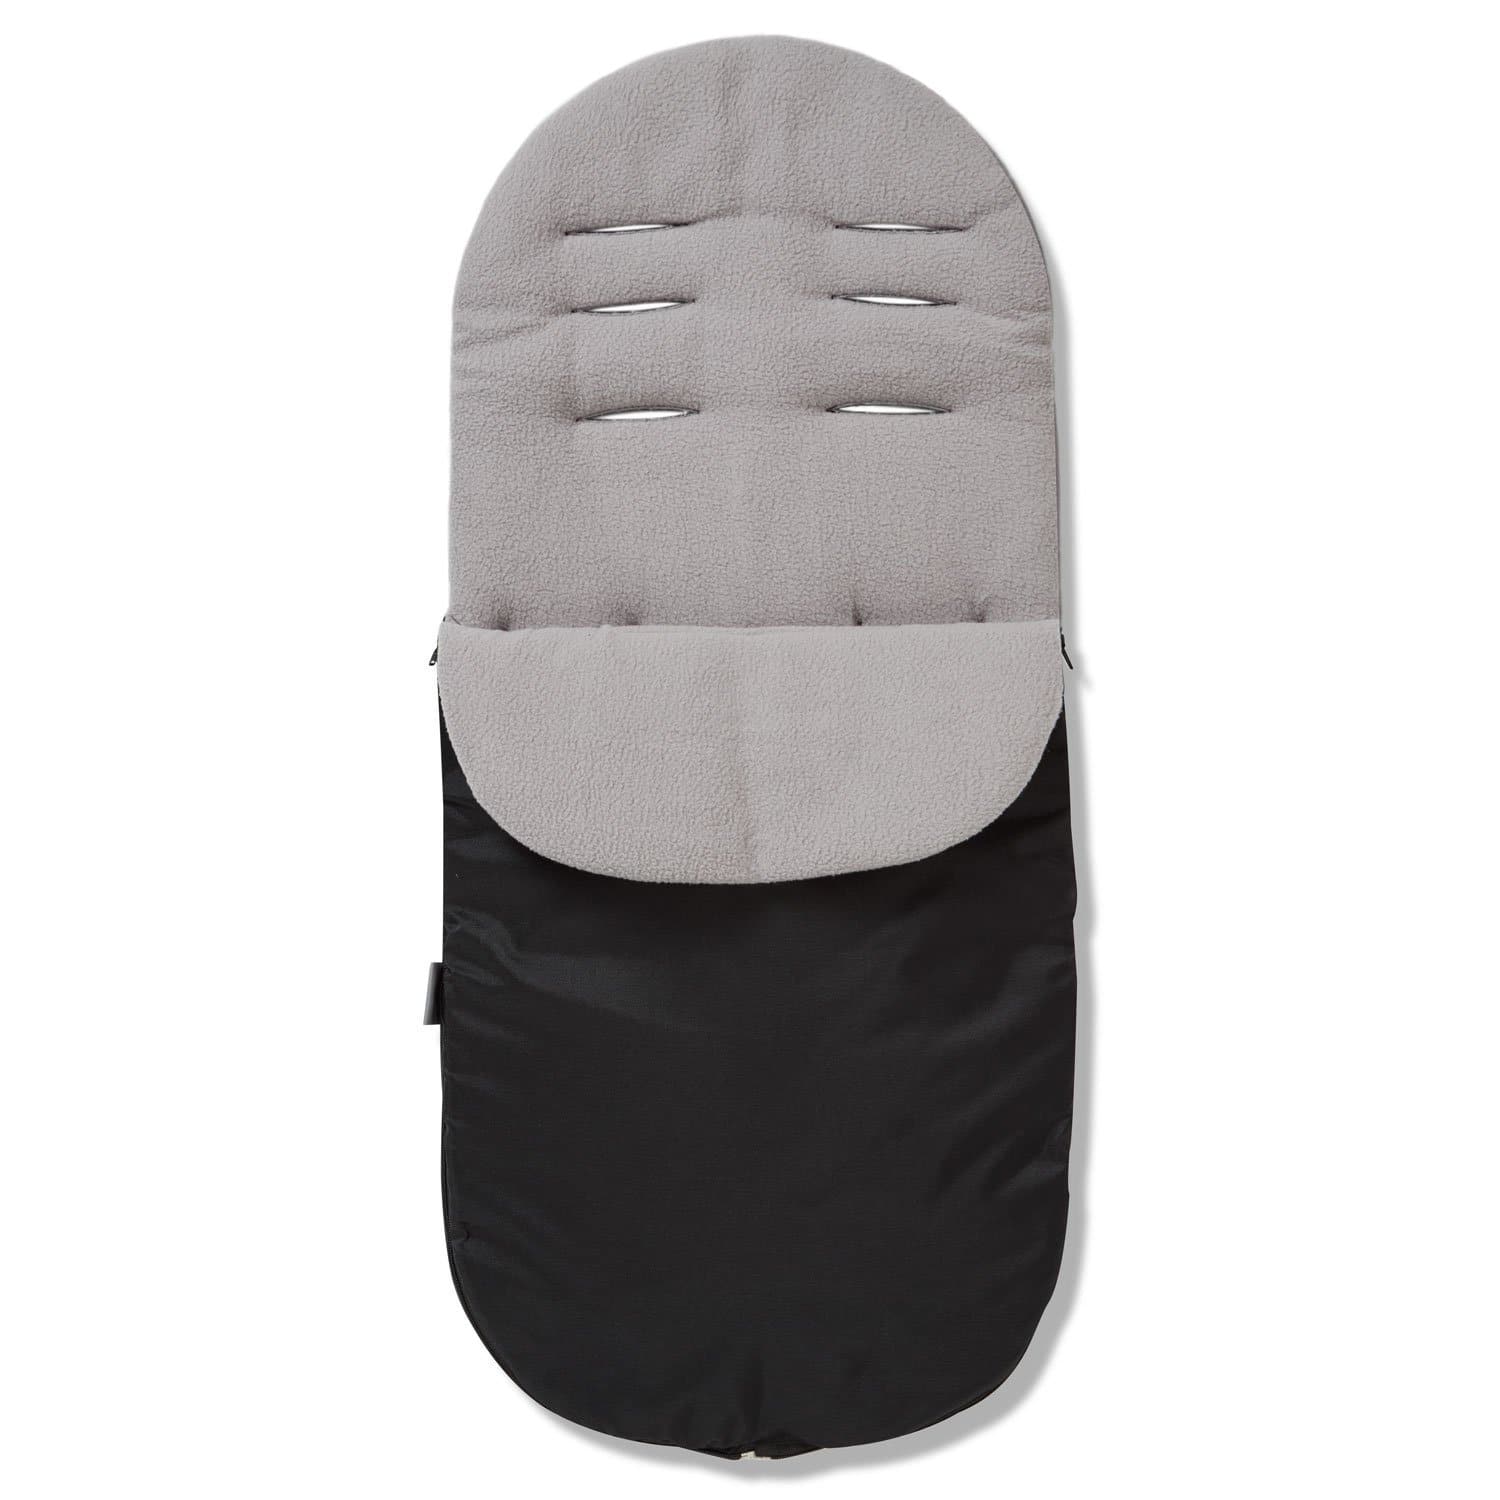 Footmuff / Cosy Toes Compatible with Venicci - Grey / Fits All Models | For Your Little One